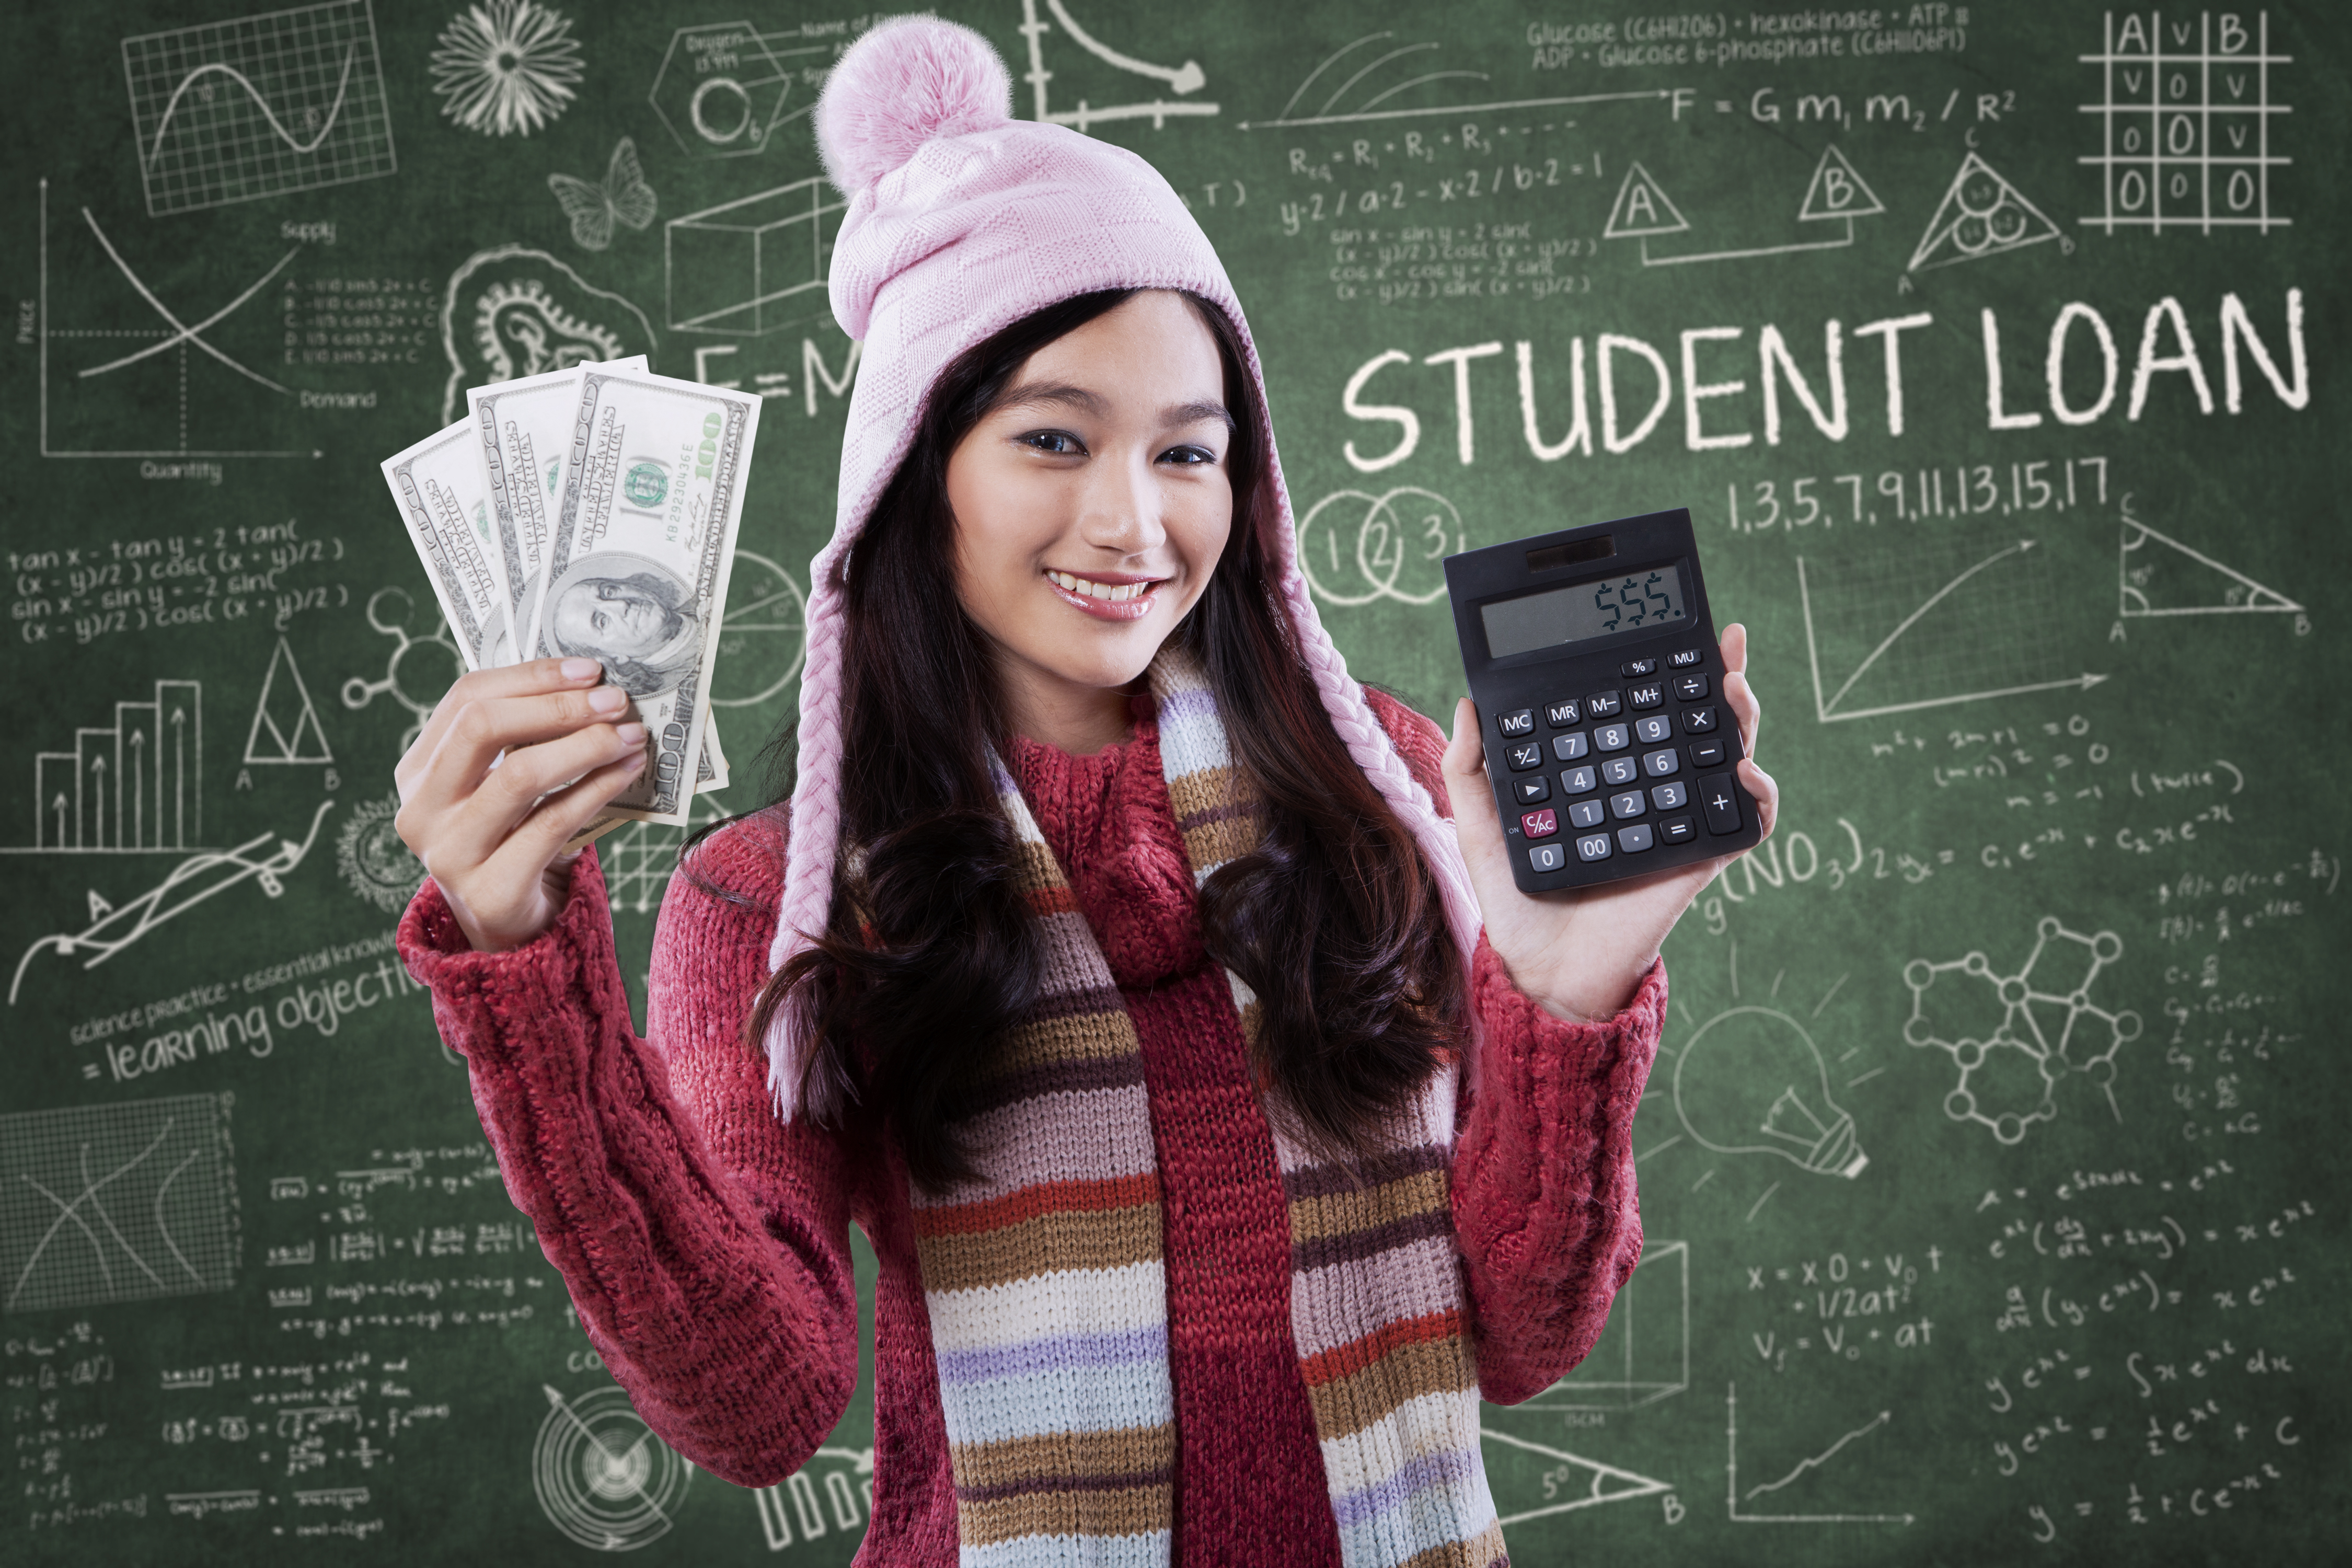 National Student Aid Care Provides Loan Document Services For Students. Call Us Today At 8883507549